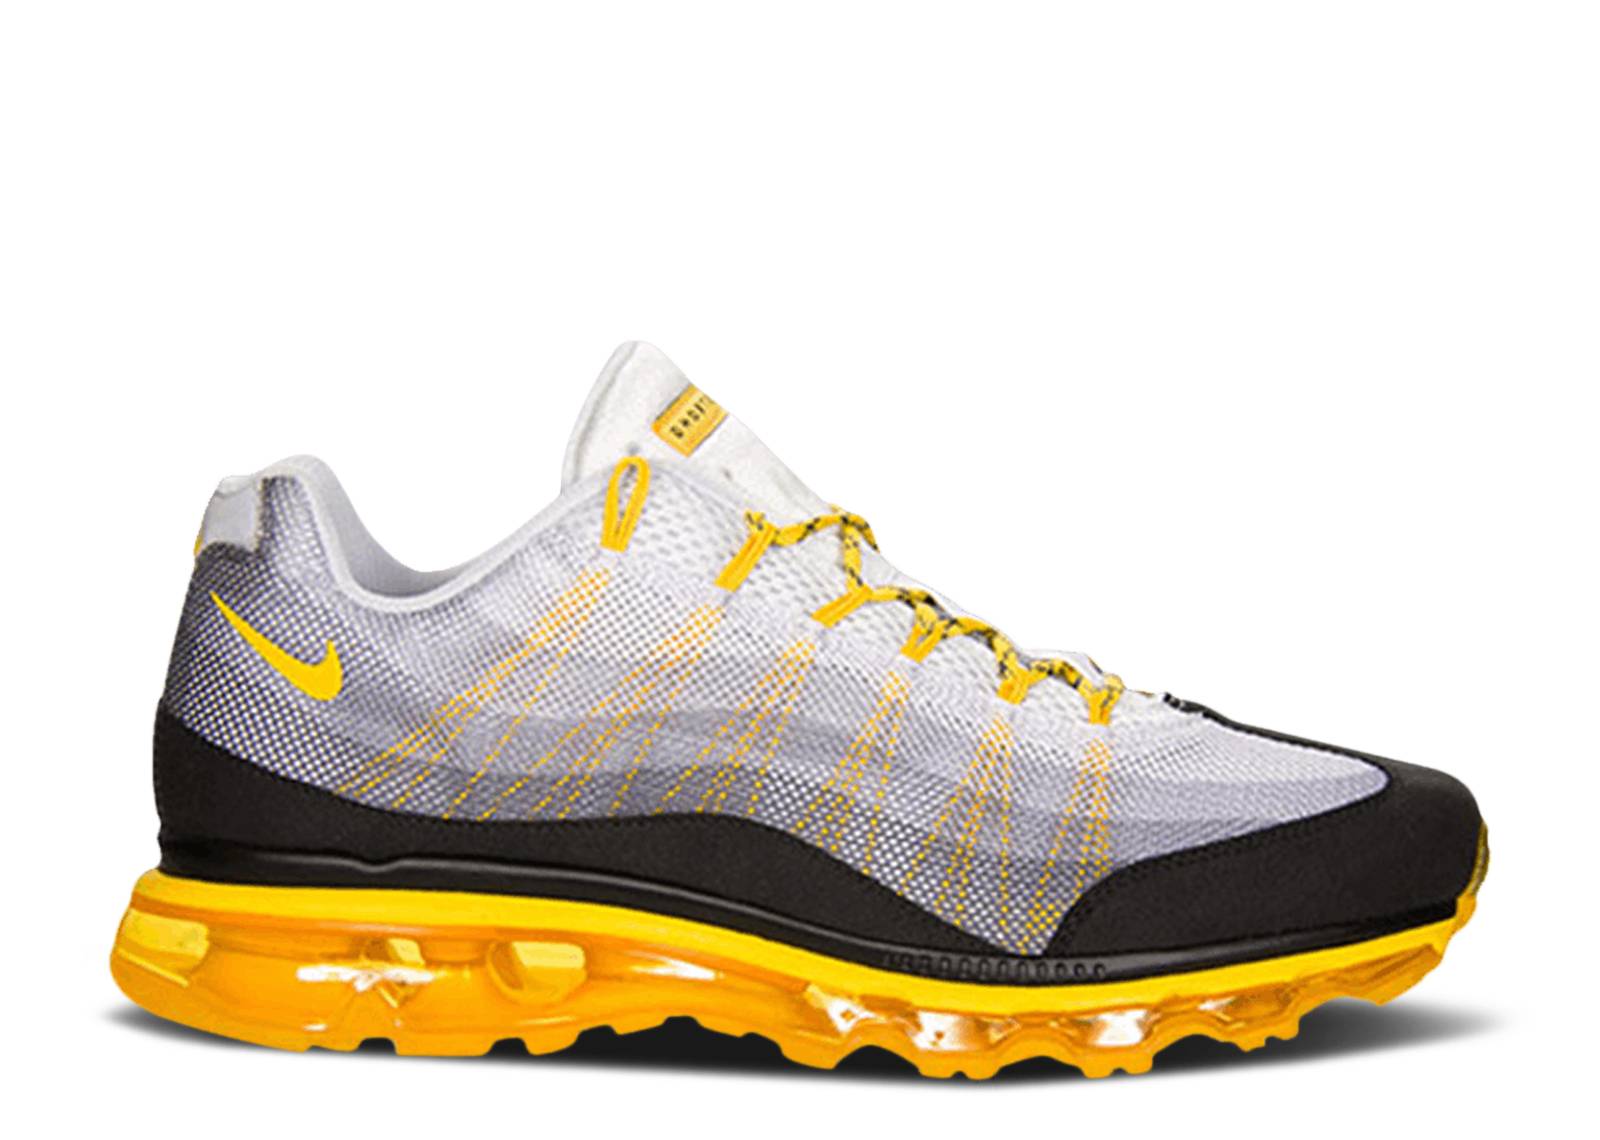 Livestrong x Air Max 95 Dynamic Flywire